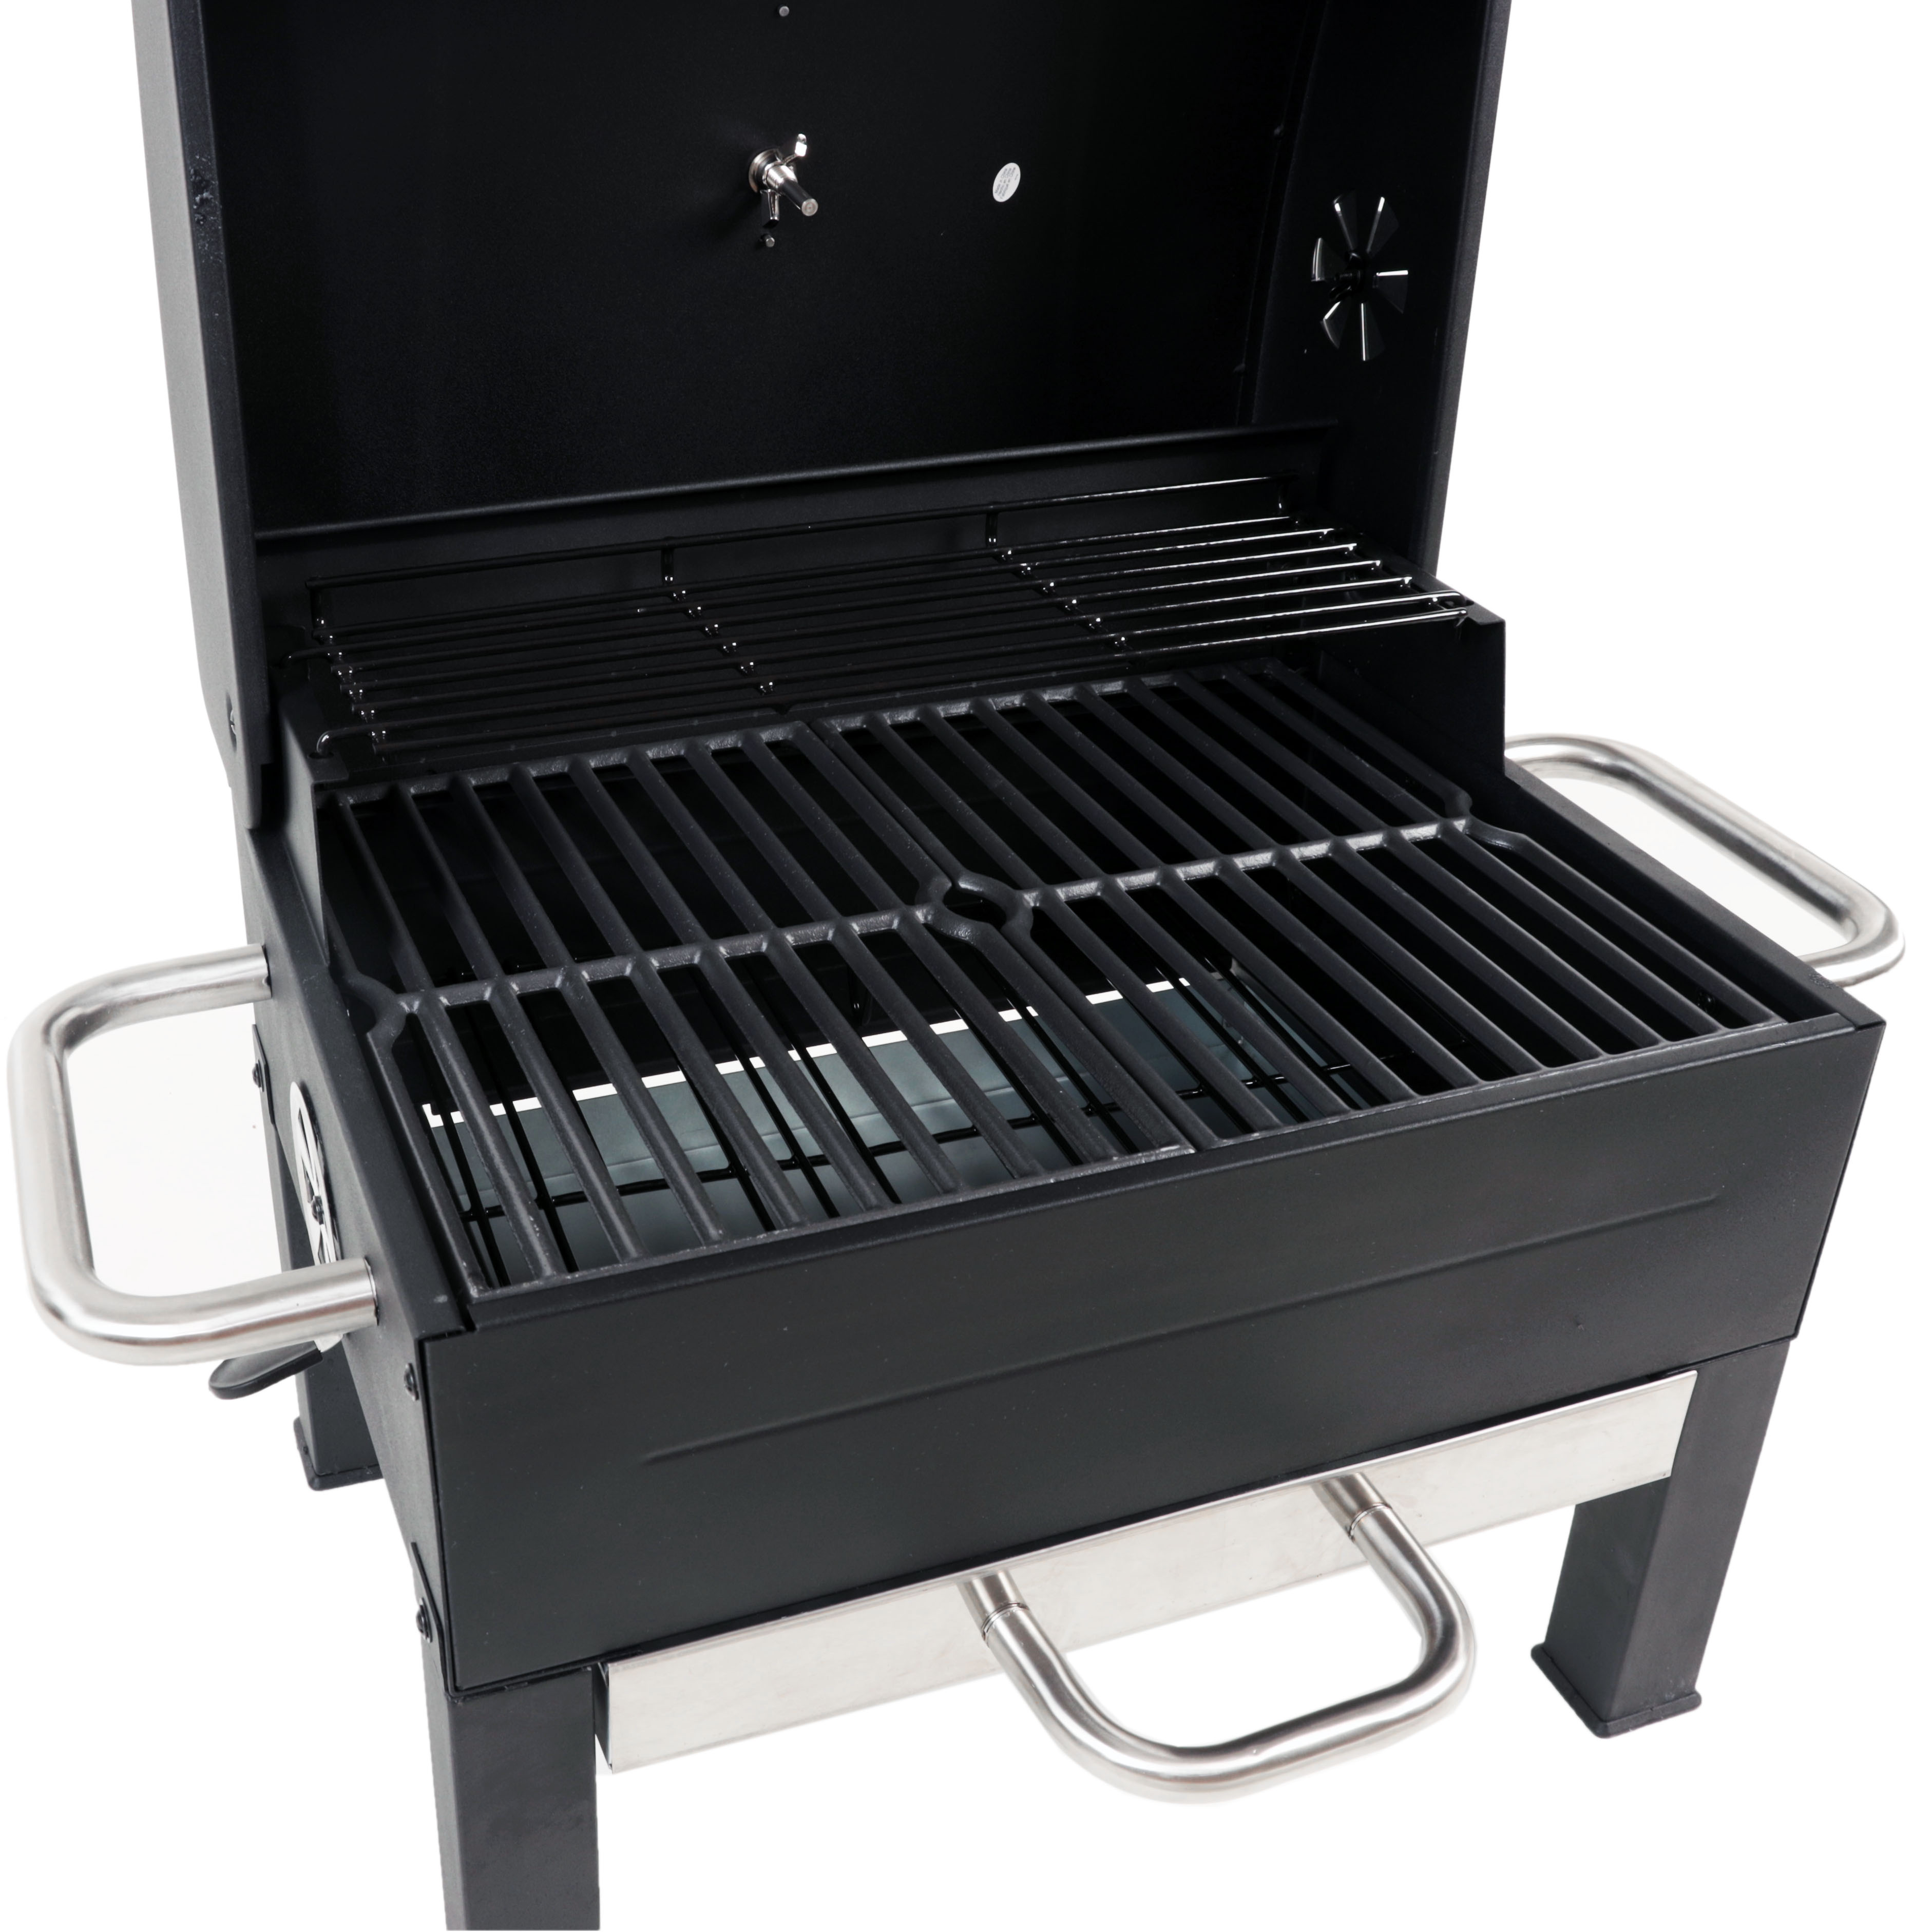 Expert Grill Premium Portable Charcoal Grill, Black and Stainless Steel - image 13 of 18